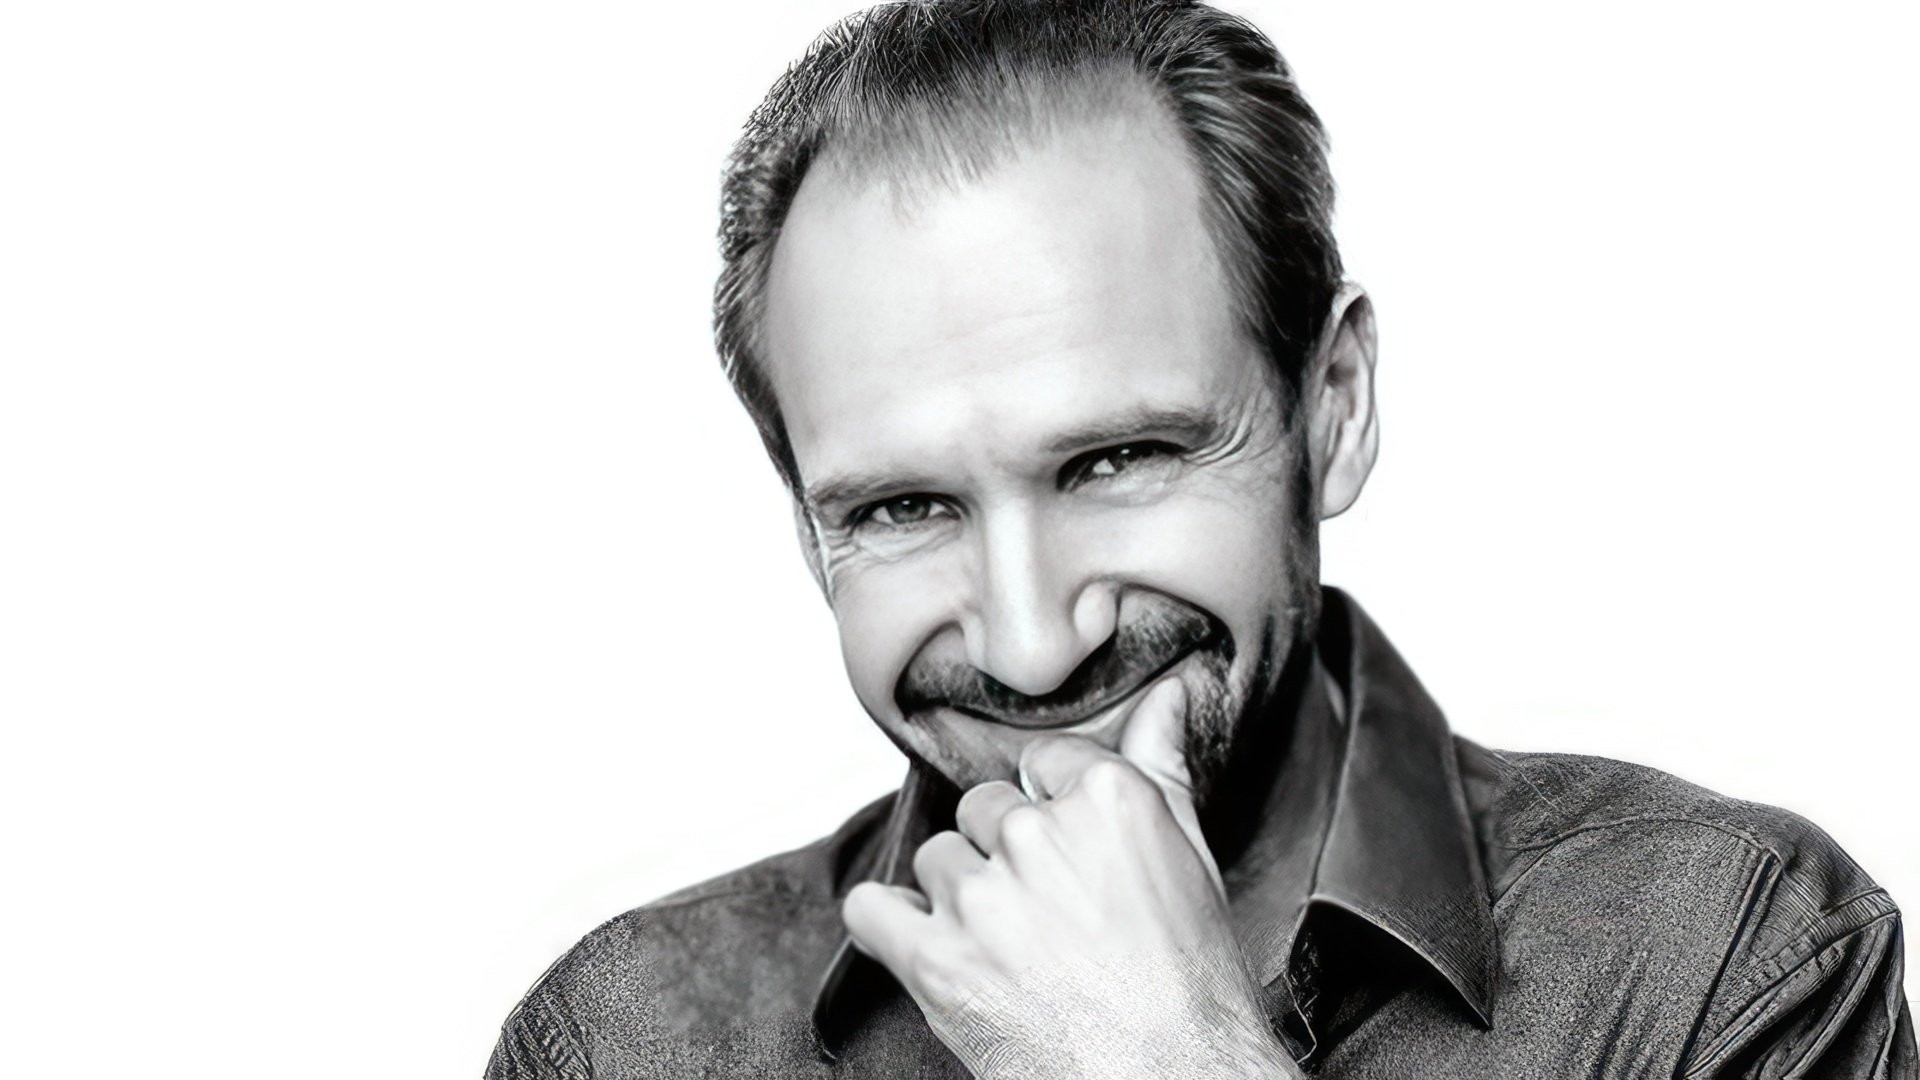 In the photo: Ralph Fiennes